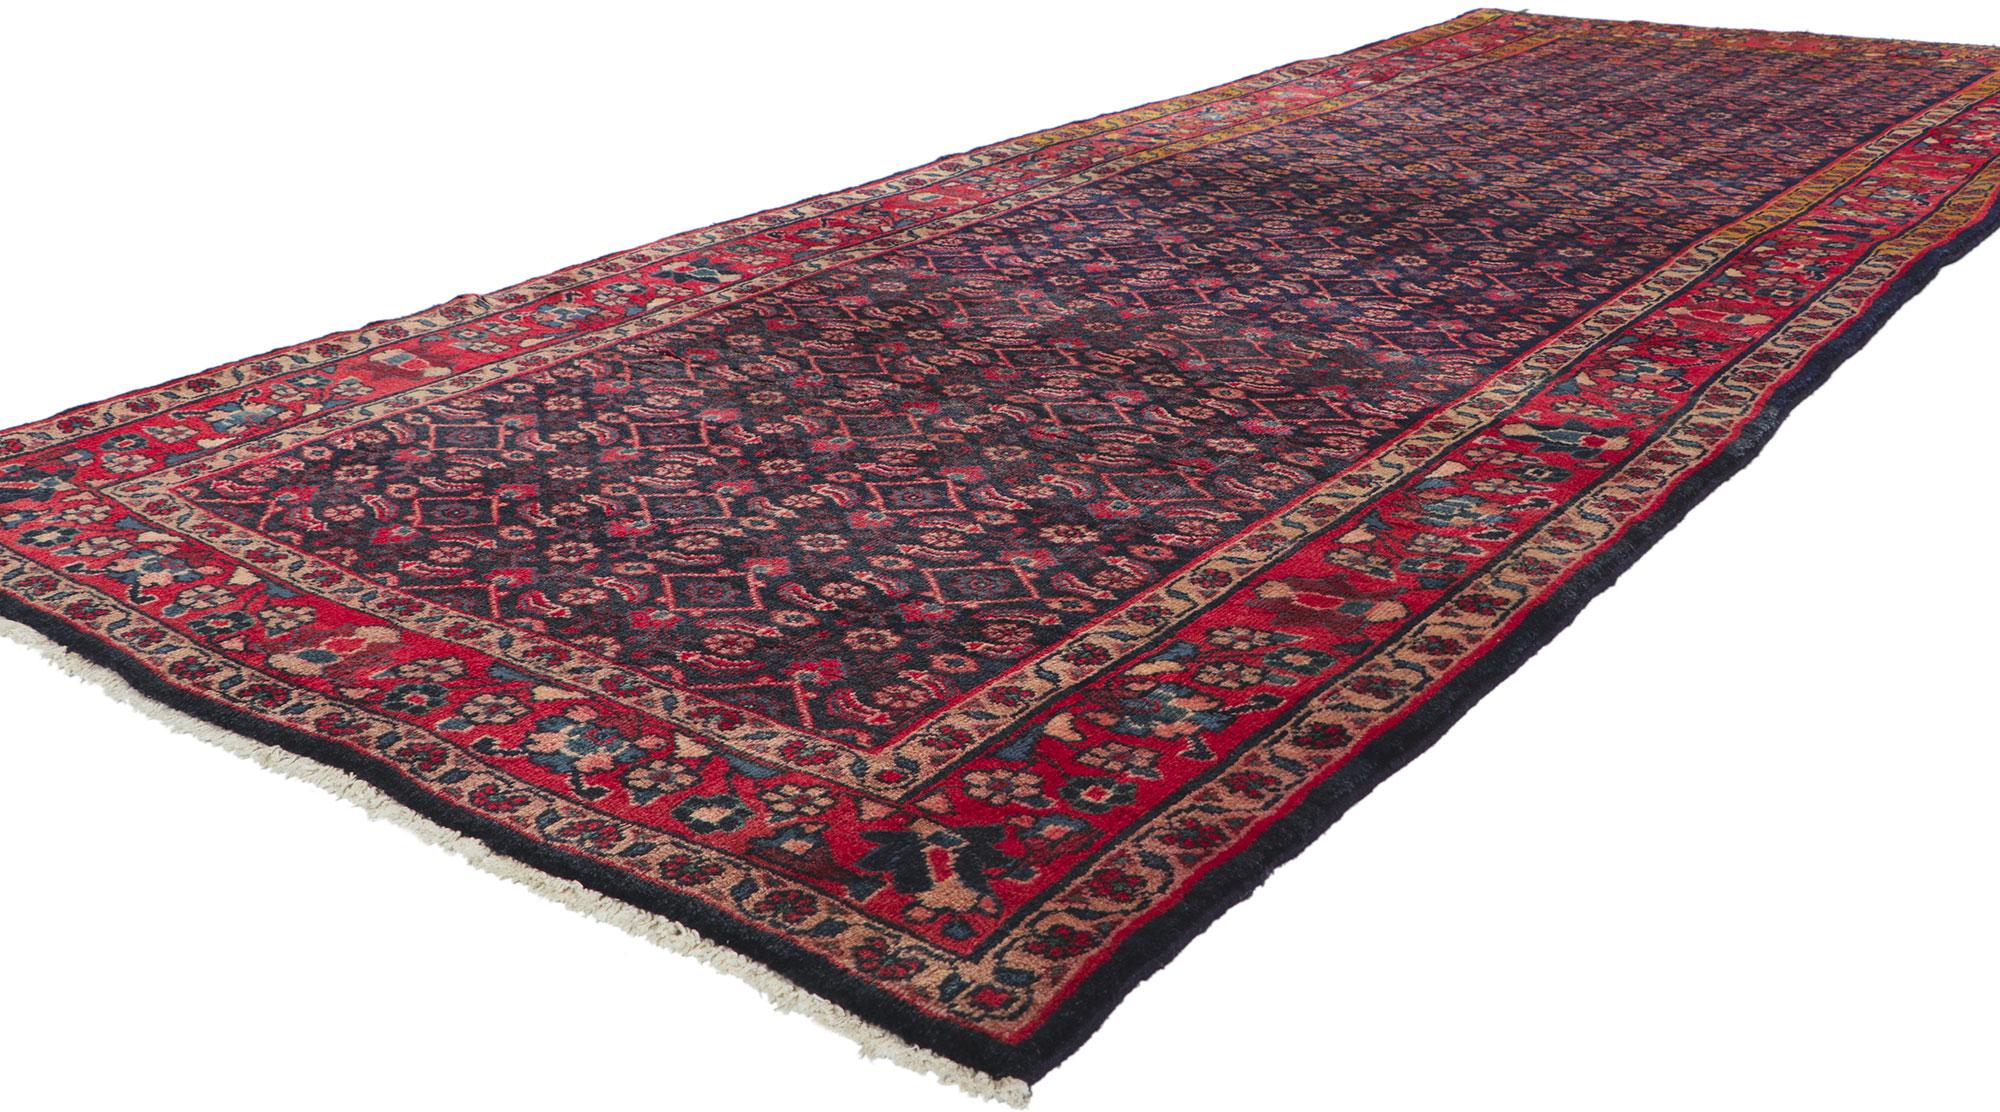 61056 Vintage Persian Malayer Hallway Rug with Traditional Style 04'00 x 10'03. Emanating sophistication and traditional style, this hand-knotted wool vintage Persian Malayer runner is a captivating vision of woven beauty. The abrashed navy blue